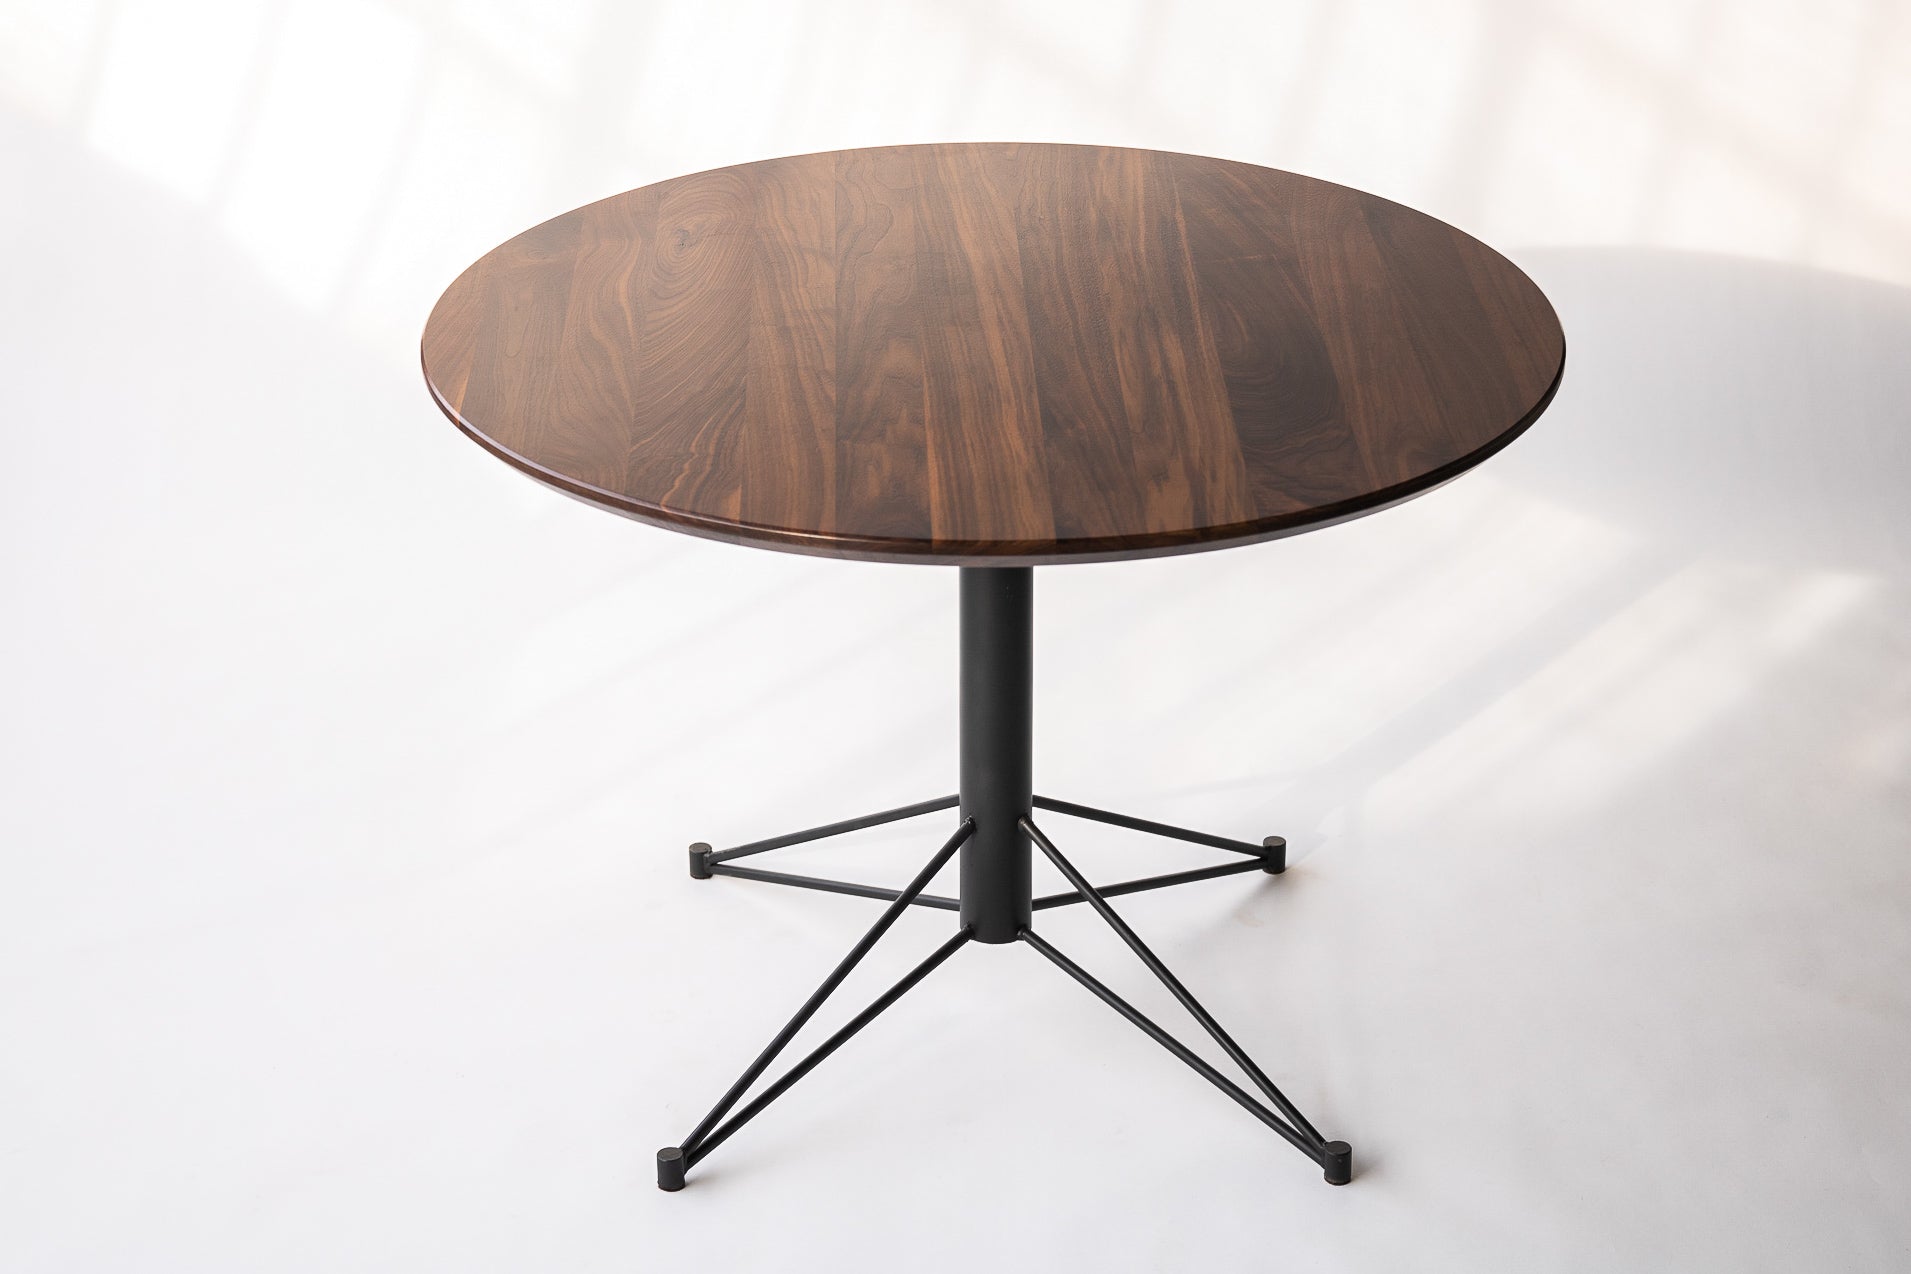 The Mast Table - Round Dining Table with Metal Base by Edgework Creative